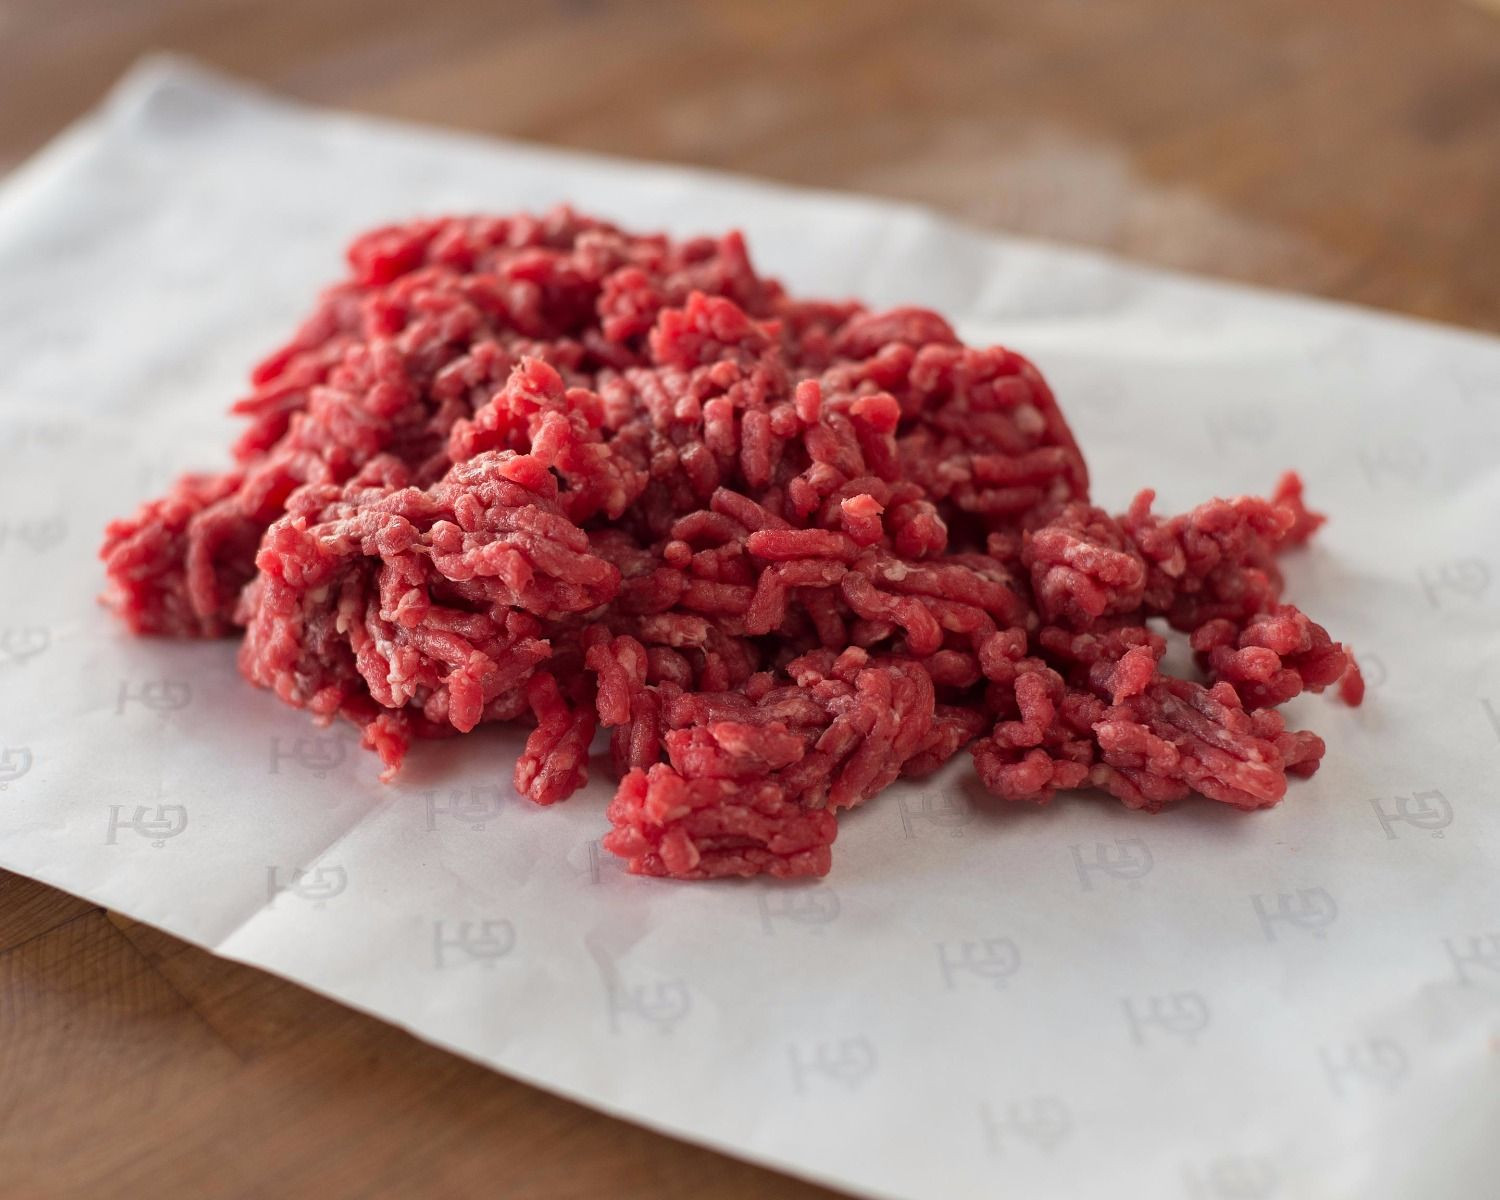 Microwave Ground Beef
 How To cook ground beef in microwave